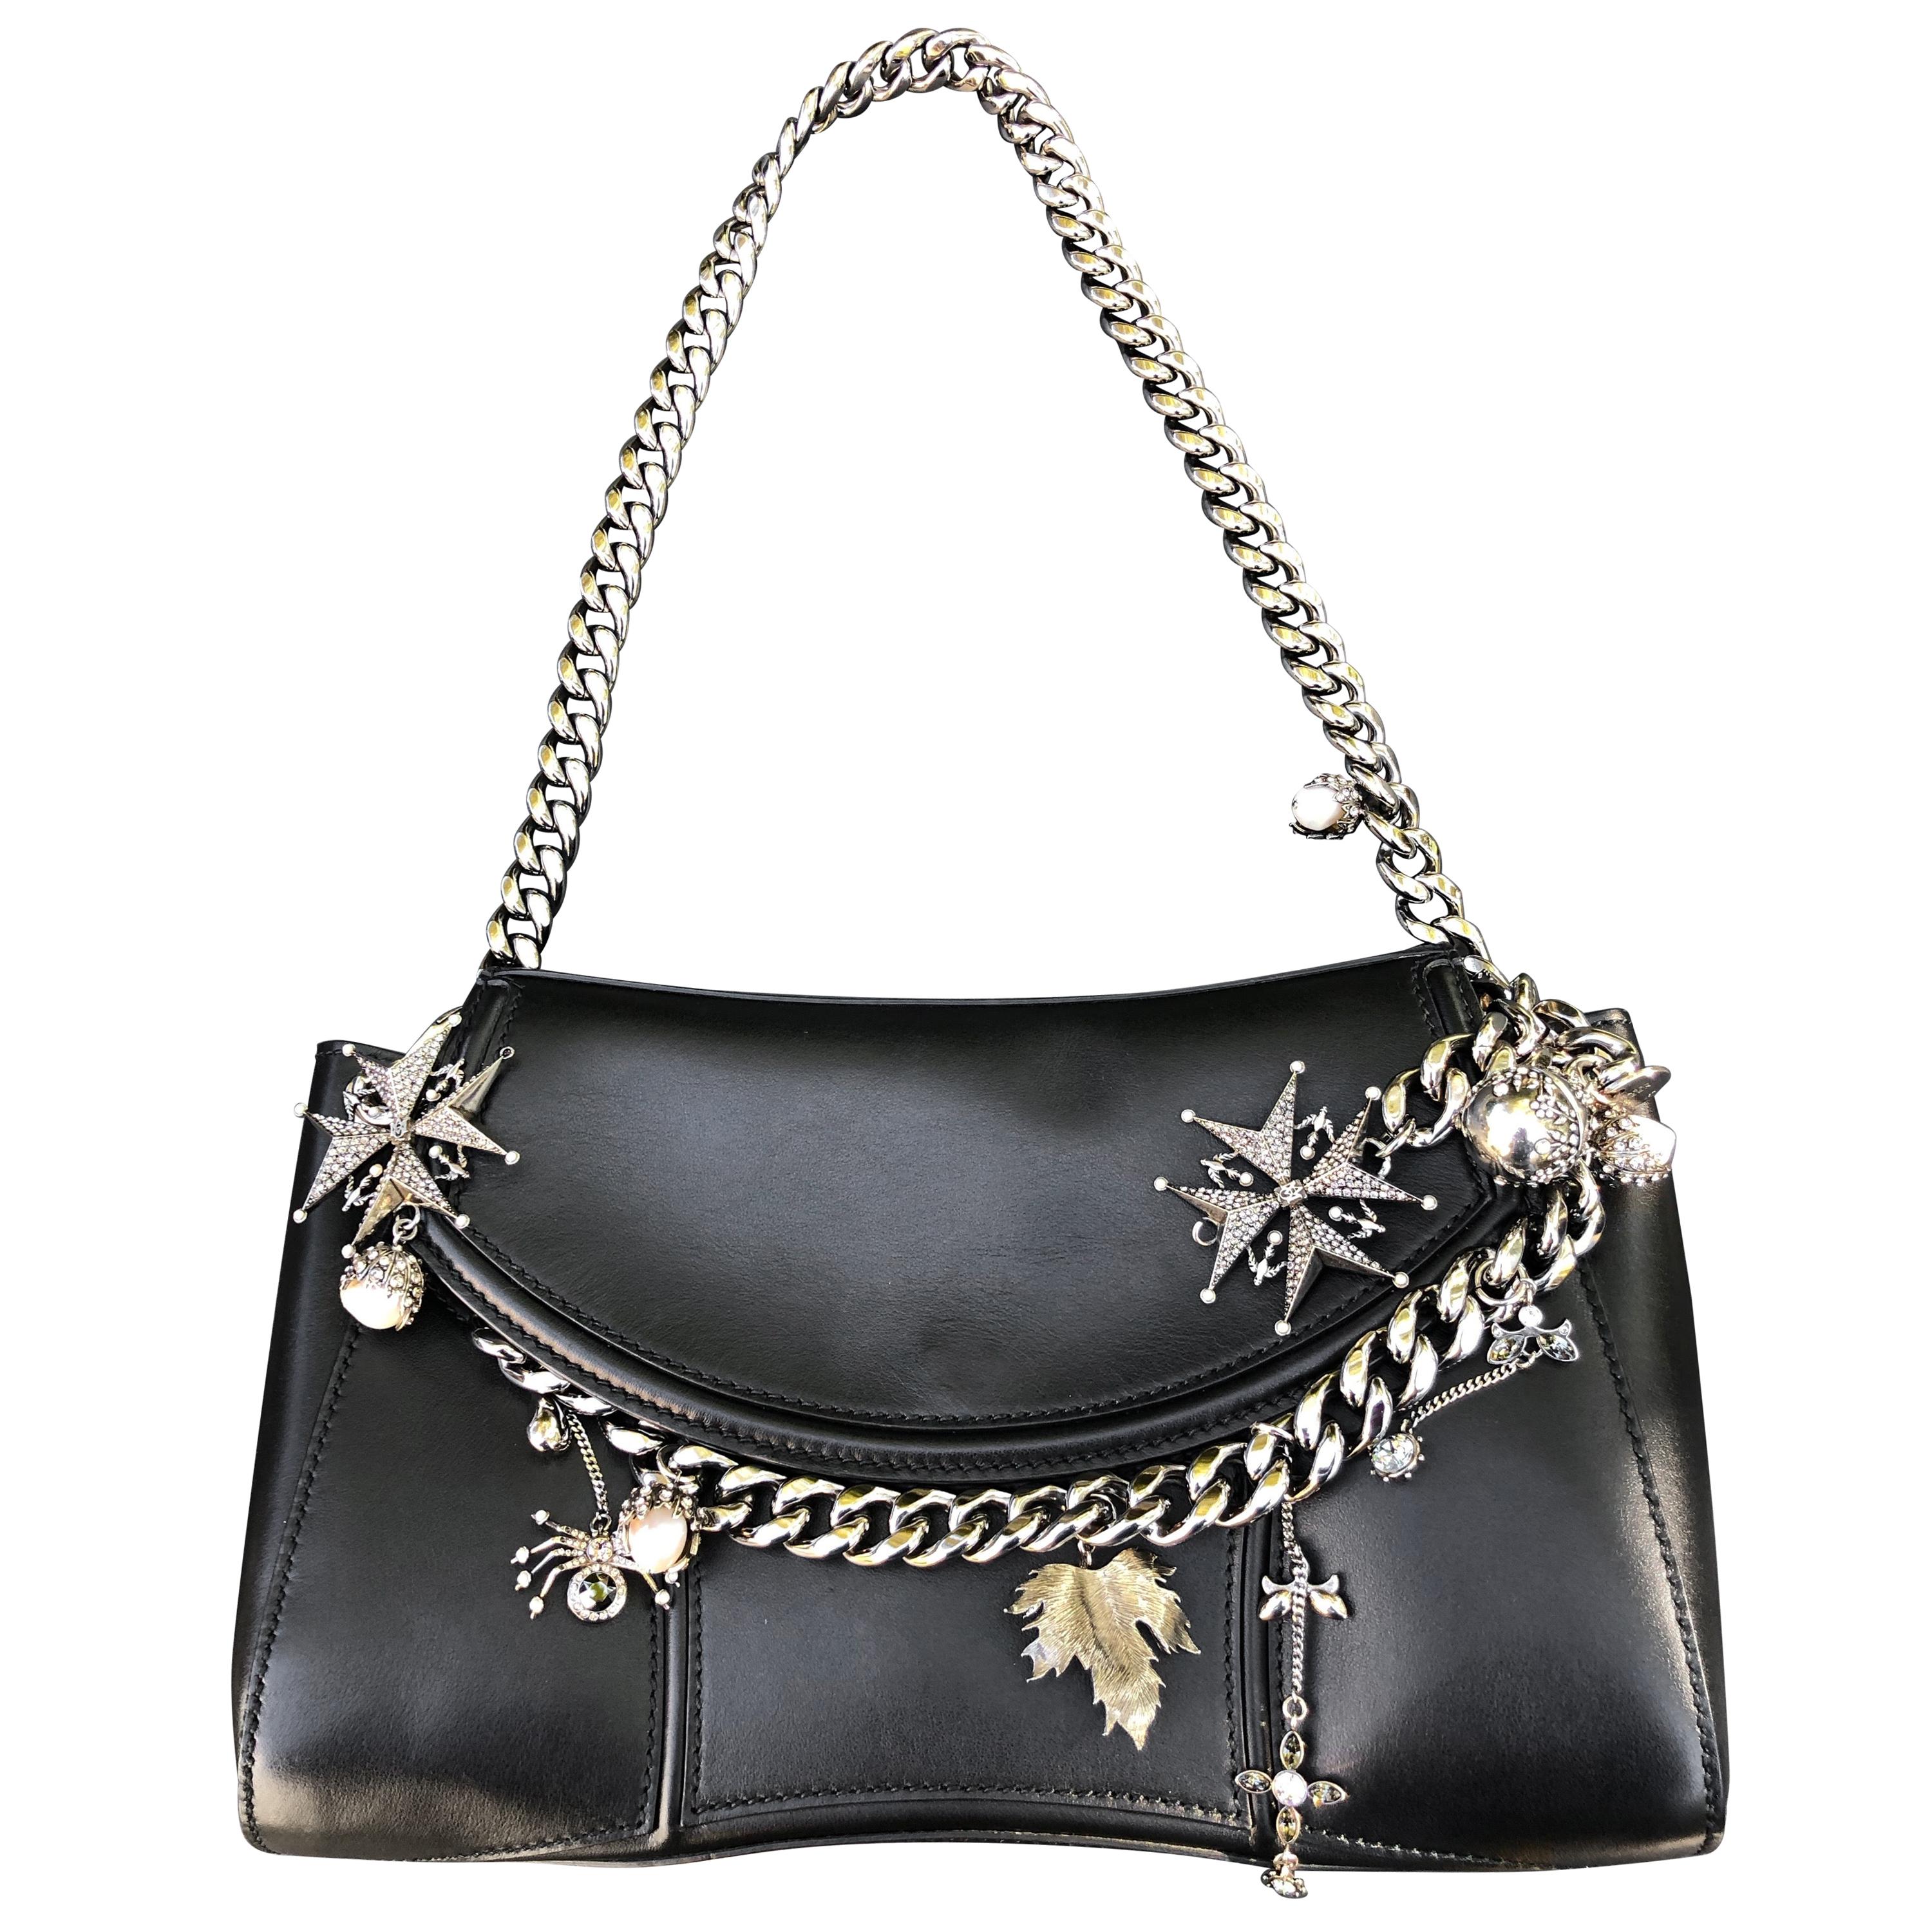 Alexander McQueen Black Medallion Leather Chain-Strap Shoulder Bag with Charms For Sale